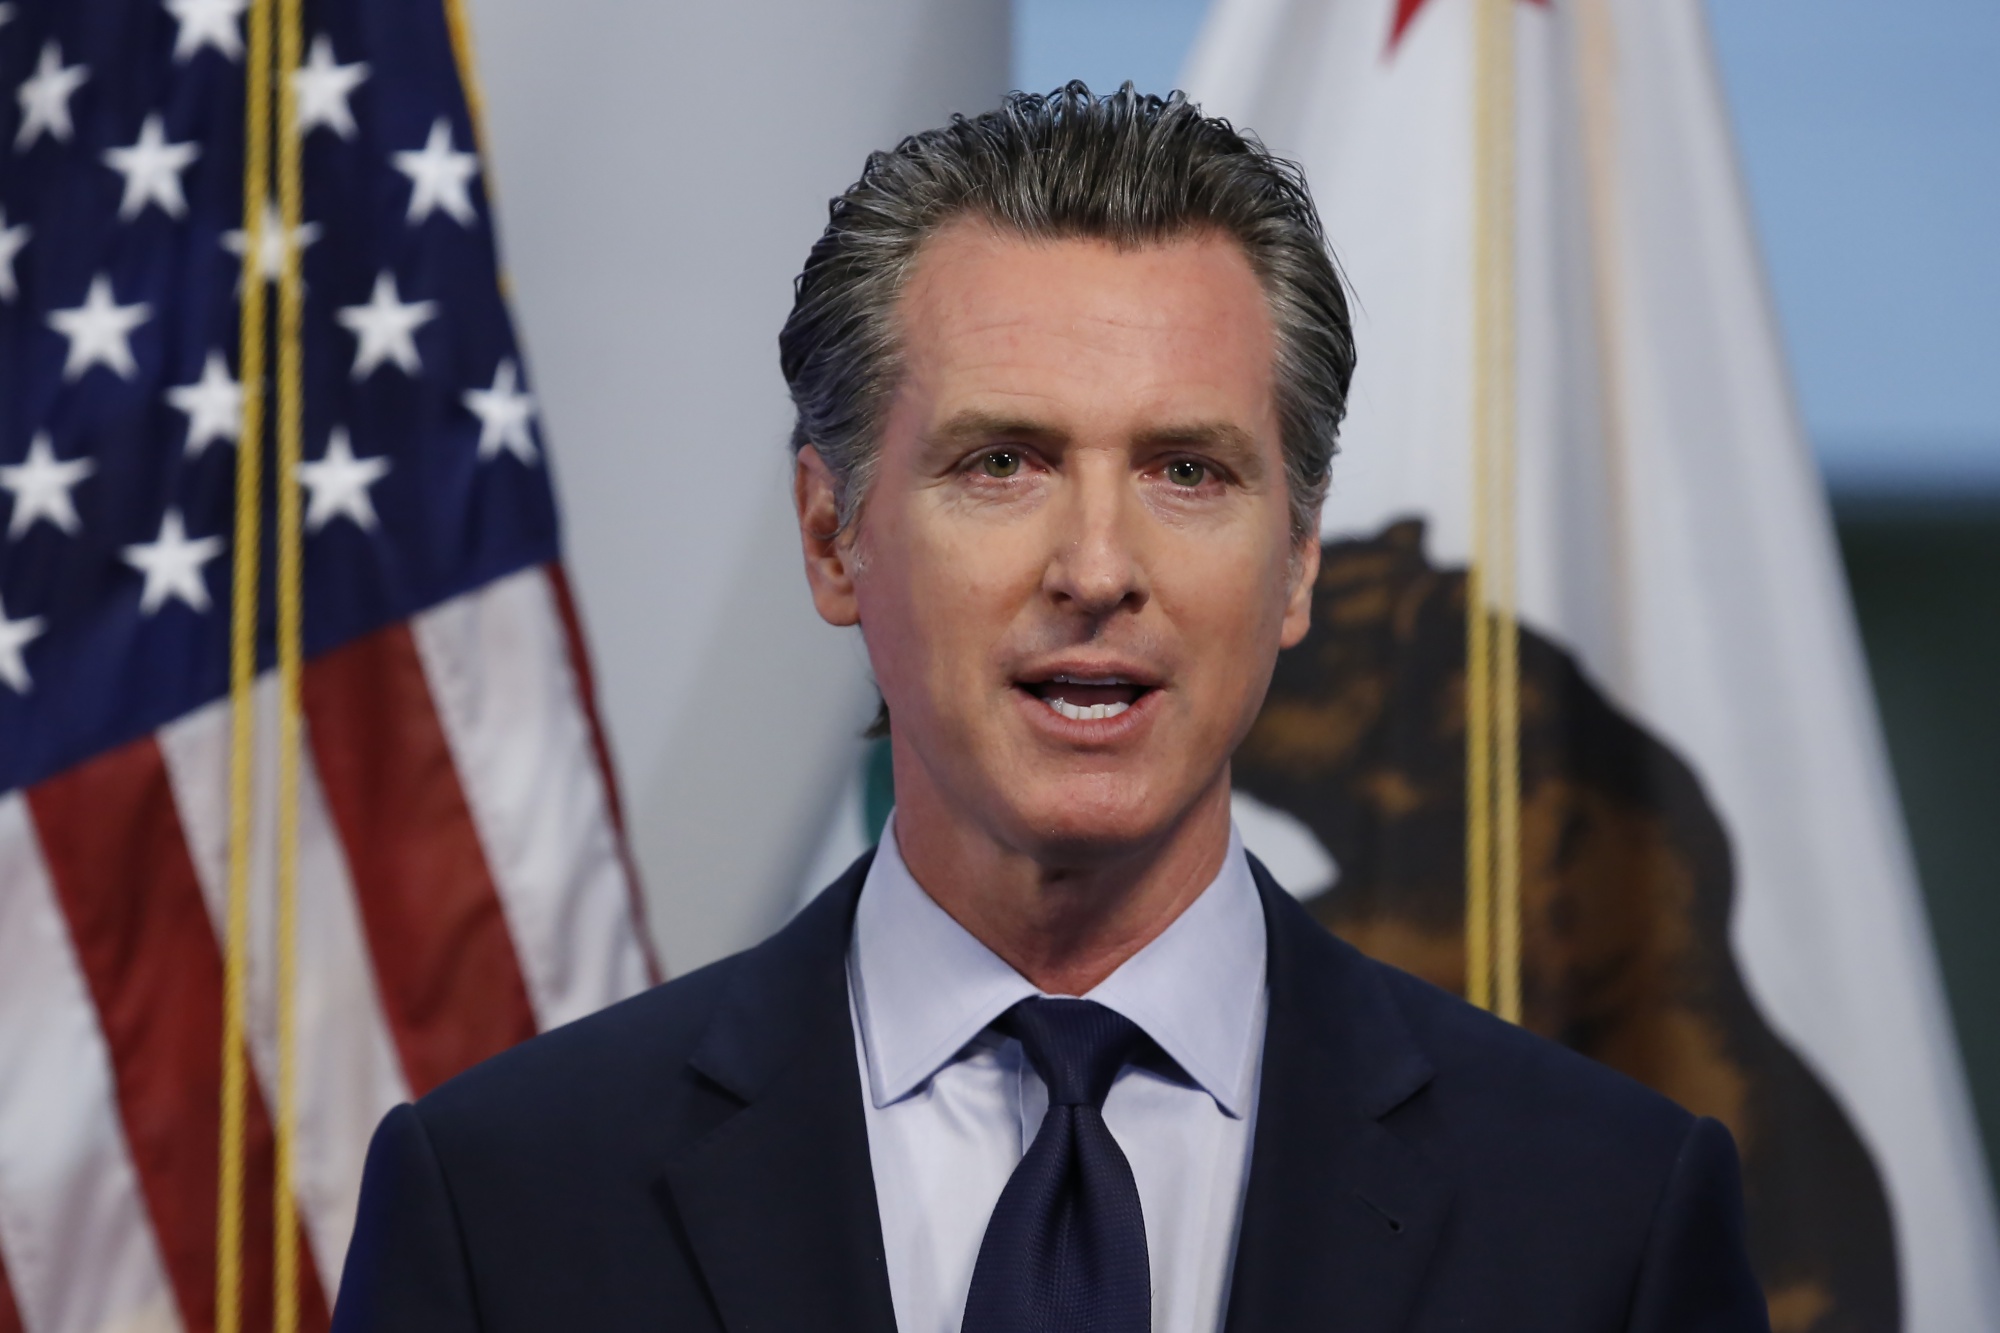 California Governor Expect Budget Gap in ‘Tens of Billions’ Bloomberg